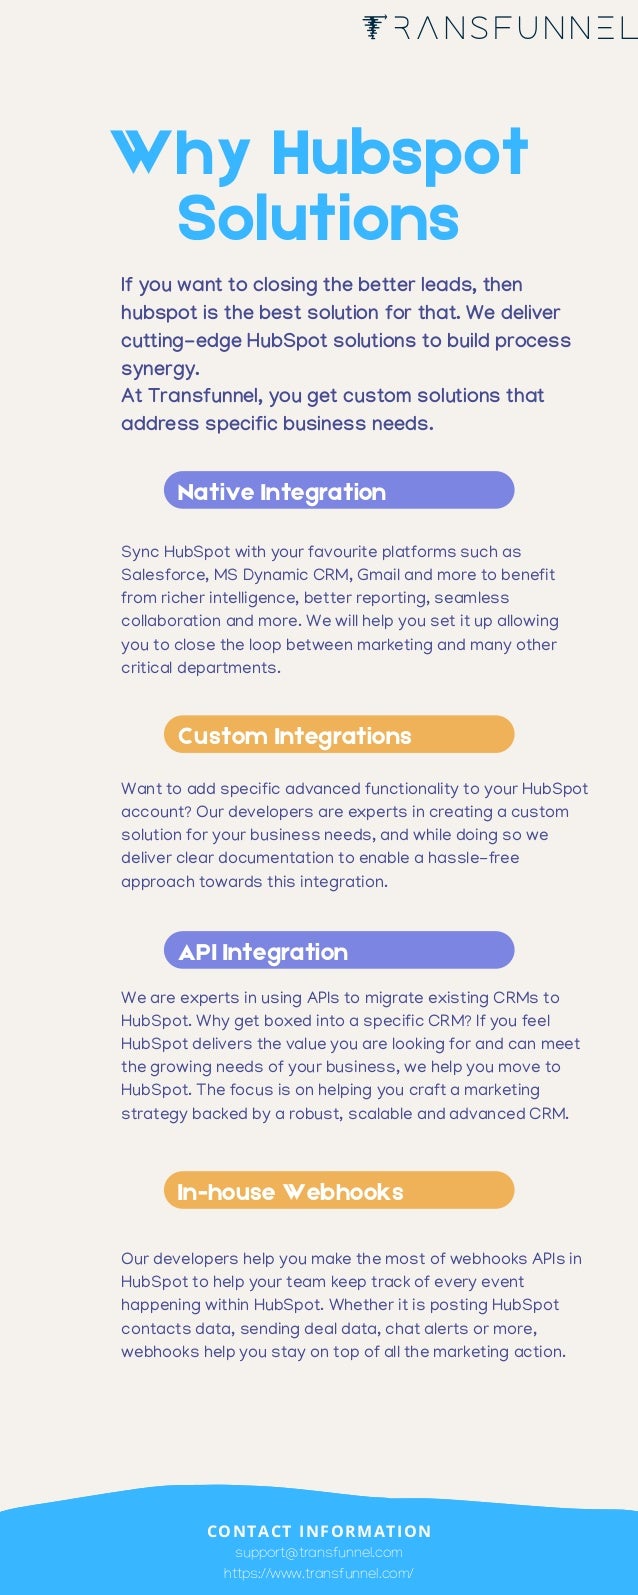 Native Integration
Custom Integrations
API Integration
In-house Webhooks
Sync HubSpot with your favourite platforms such as
Salesforce, MS Dynamic CRM, Gmail and more to benefit
from richer intelligence, better reporting, seamless
collaboration and more. We will help you set it up allowing
you to close the loop between marketing and many other
critical departments.
Want to add specific advanced functionality to your HubSpot
account? Our developers are experts in creating a custom
solution for your business needs, and while doing so we
deliver clear documentation to enable a hassle-free
approach towards this integration.
We are experts in using APIs to migrate existing CRMs to
HubSpot. Why get boxed into a specific CRM? If you feel
HubSpot delivers the value you are looking for and can meet
the growing needs of your business, we help you move to
HubSpot. The focus is on helping you craft a marketing
strategy backed by a robust, scalable and advanced CRM.
Our developers help you make the most of webhooks APIs in
HubSpot to help your team keep track of every event
happening within HubSpot. Whether it is posting HubSpot
contacts data, sending deal data, chat alerts or more,
webhooks help you stay on top of all the marketing action.
Why Hubspot
Solutions
If you want to closing the better leads, then
hubspot is the best solution for that. We deliver
cutting-edge HubSpot solutions to build process
synergy.
At Transfunnel, you get custom solutions that
address specific business needs.
support@transfunnel.com
https://www.transfunnel.com/
CONTACT INFORMATION
 